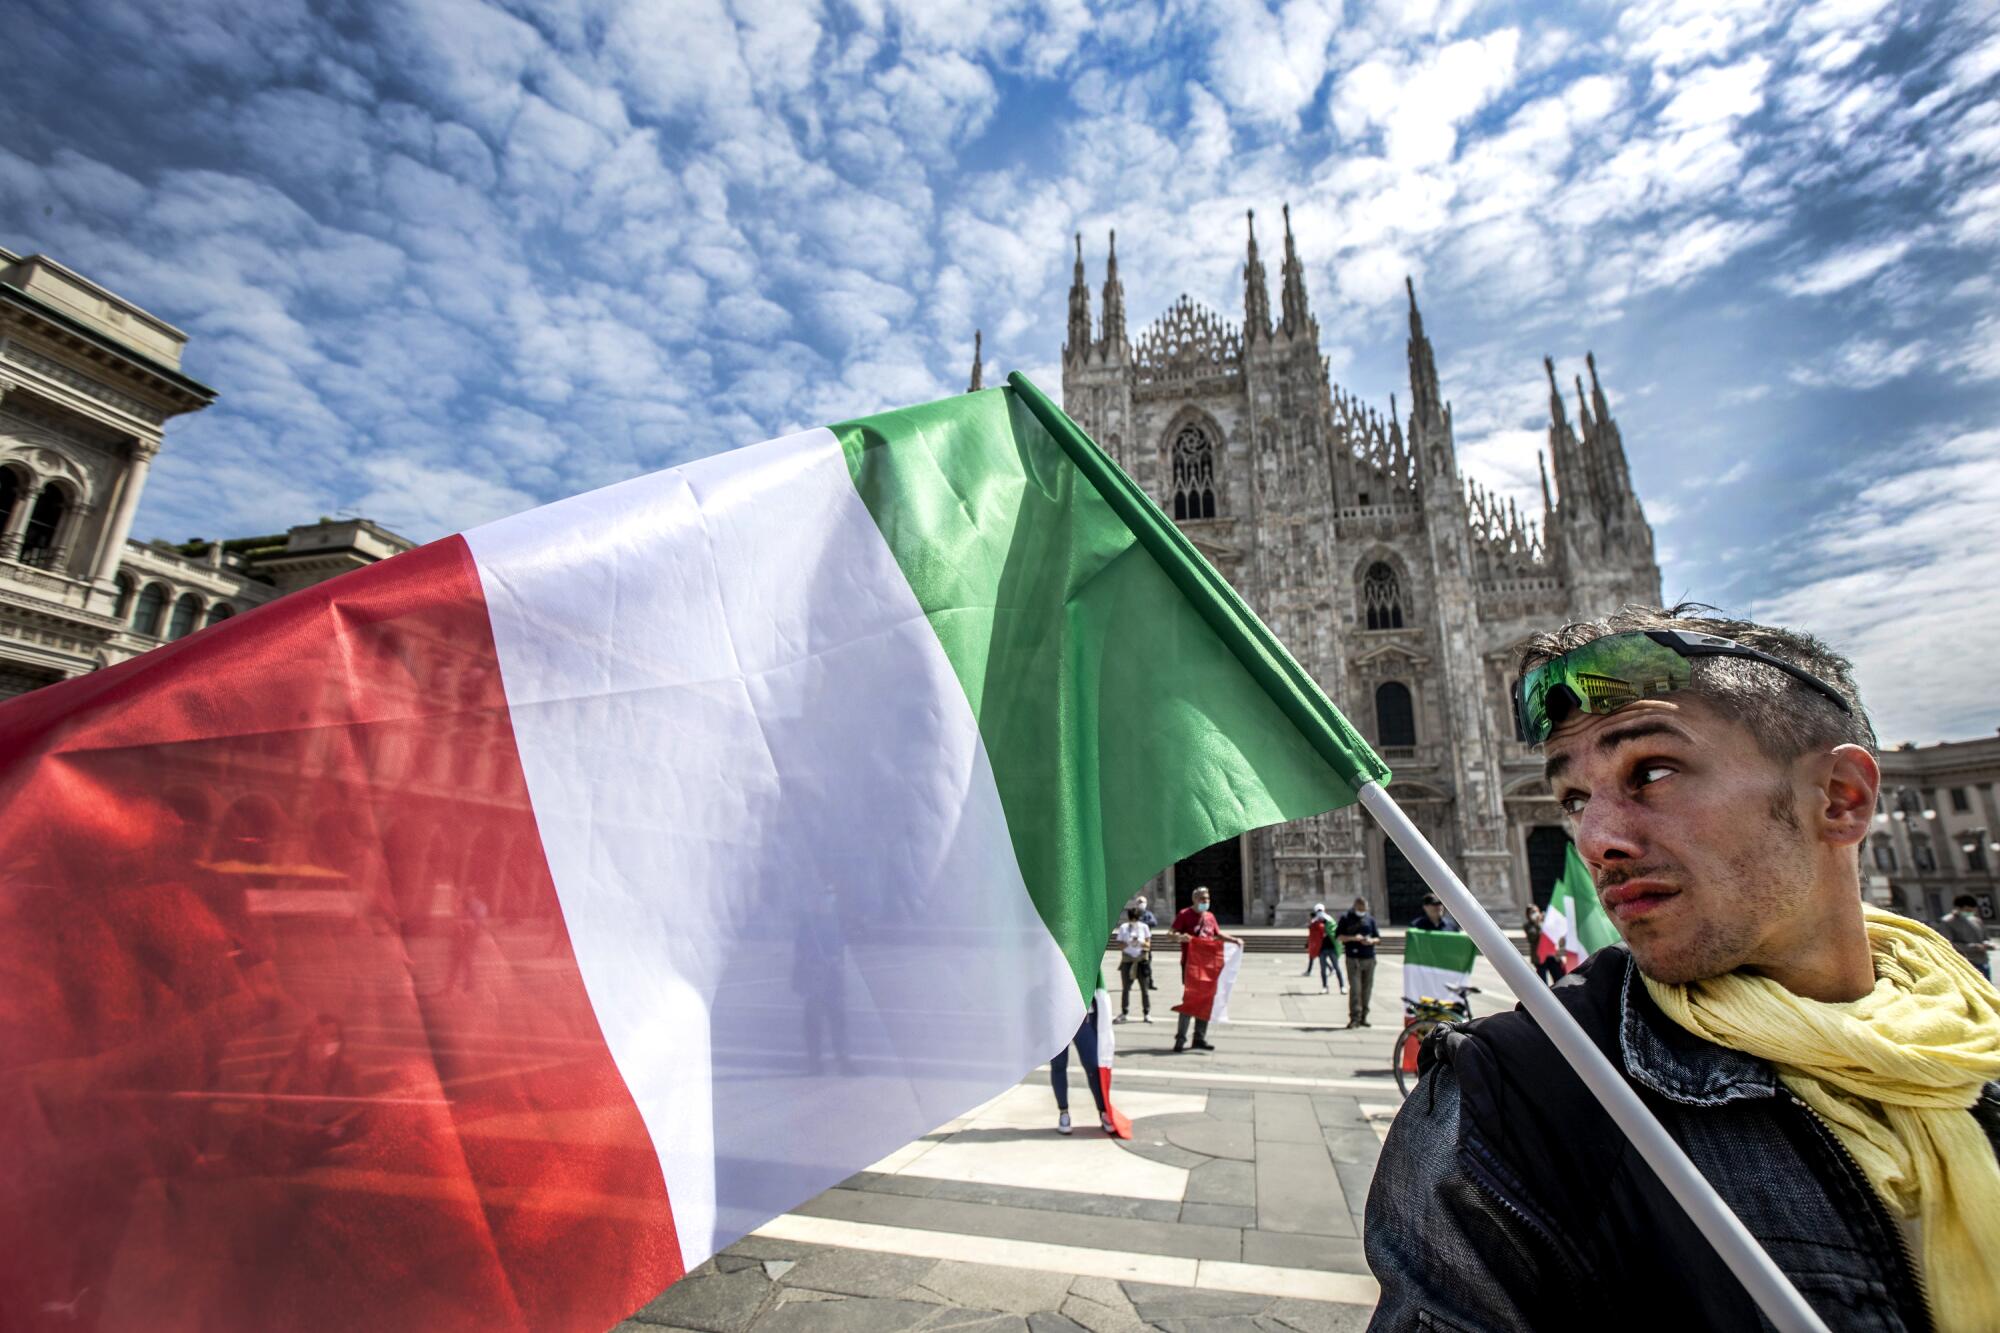 A man holds an Italian flag in front of the Duomo cathedral in Milan on Monday. Italy has begun allowing citizens to return to work and easing restrictions imposed to stem COVID-19 infections.